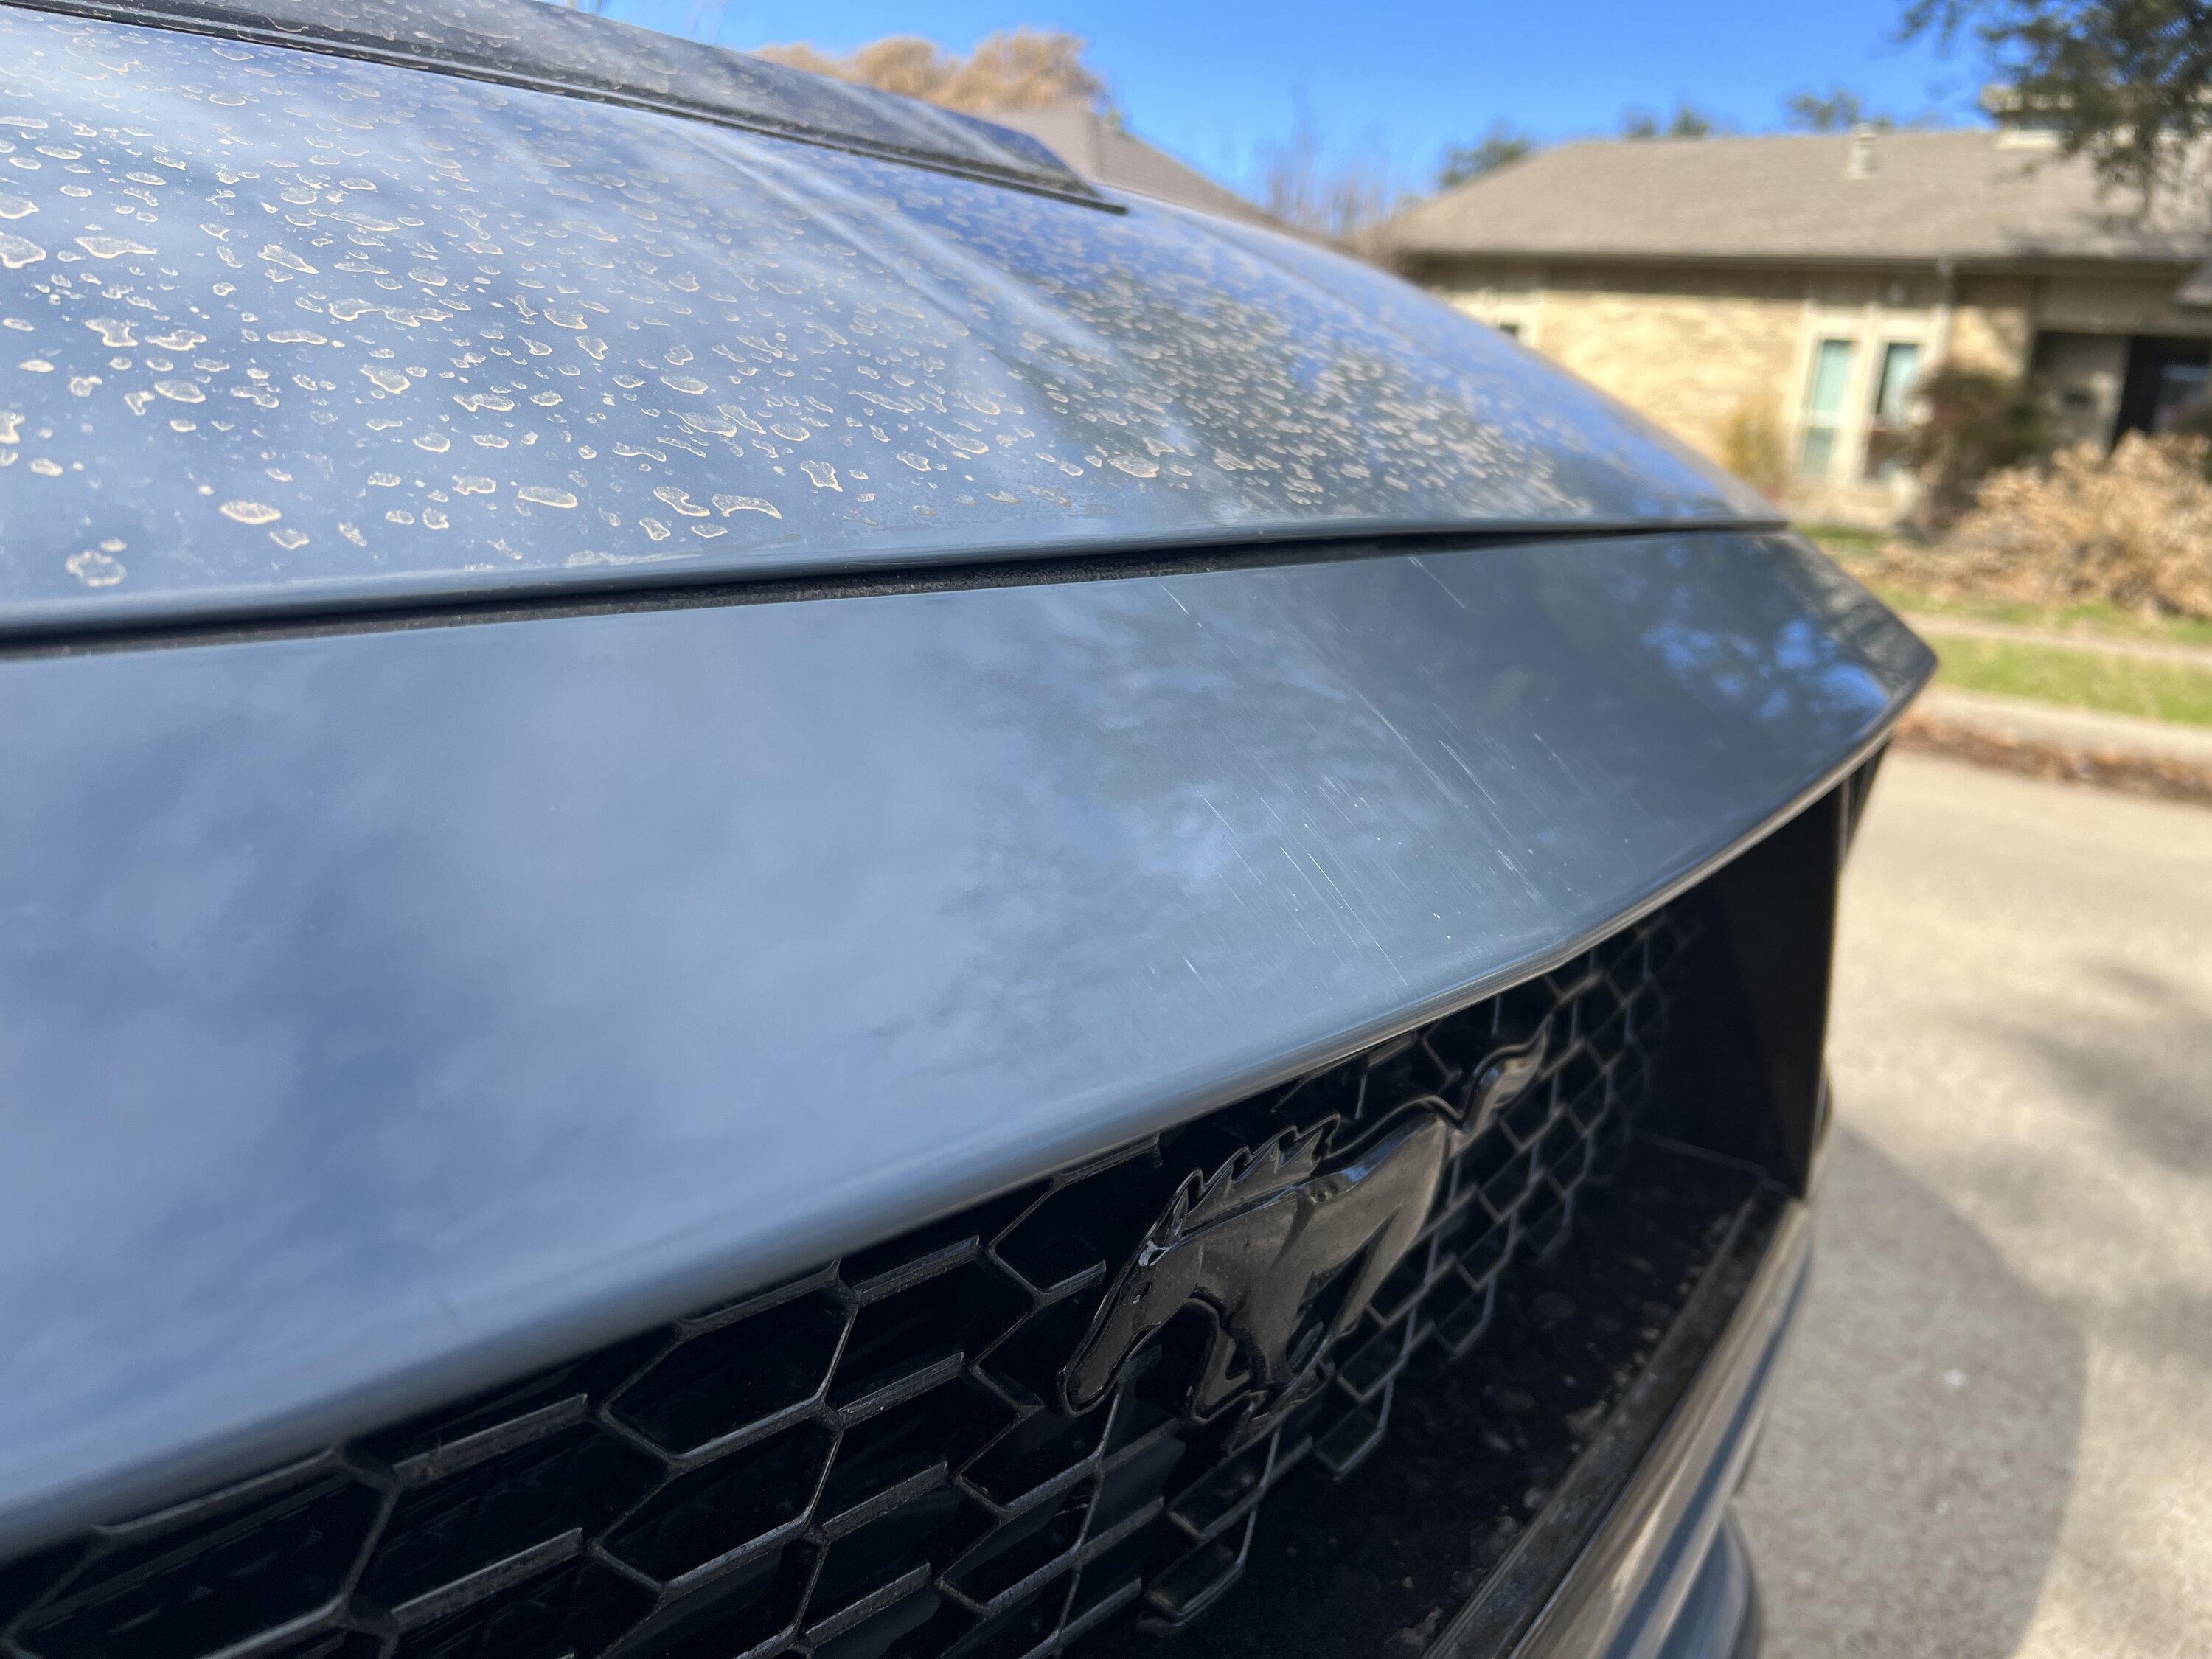 S650 Mustang Got backed into, how bad does the damage look? Next steps? IMG_6760